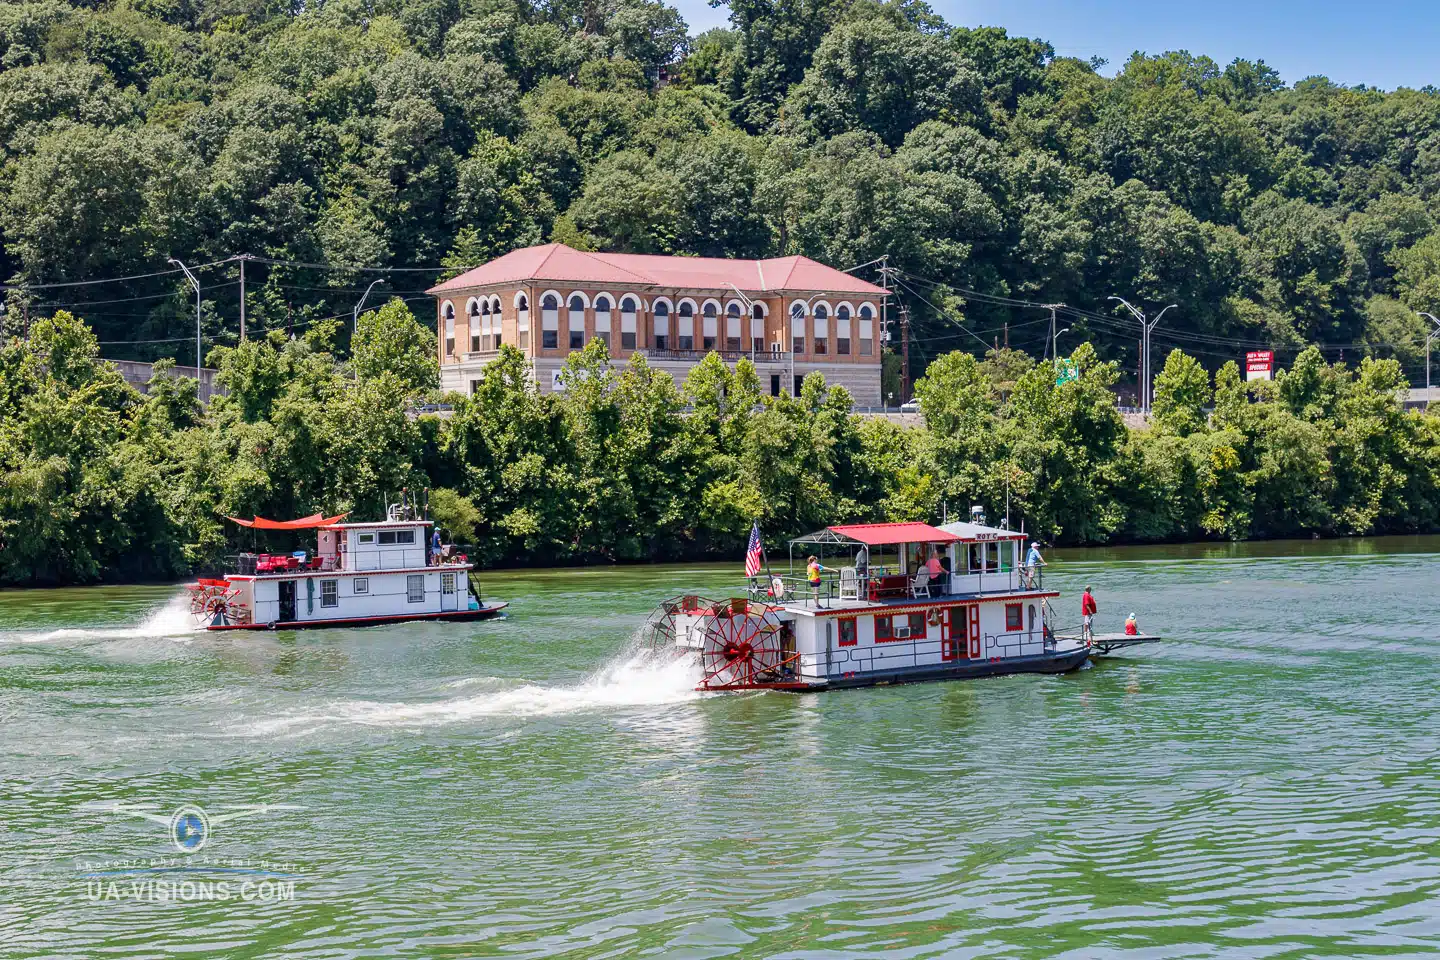 Several sternwheel boats in action during the 2022 Charleston Sternwheel Regatta boat race.